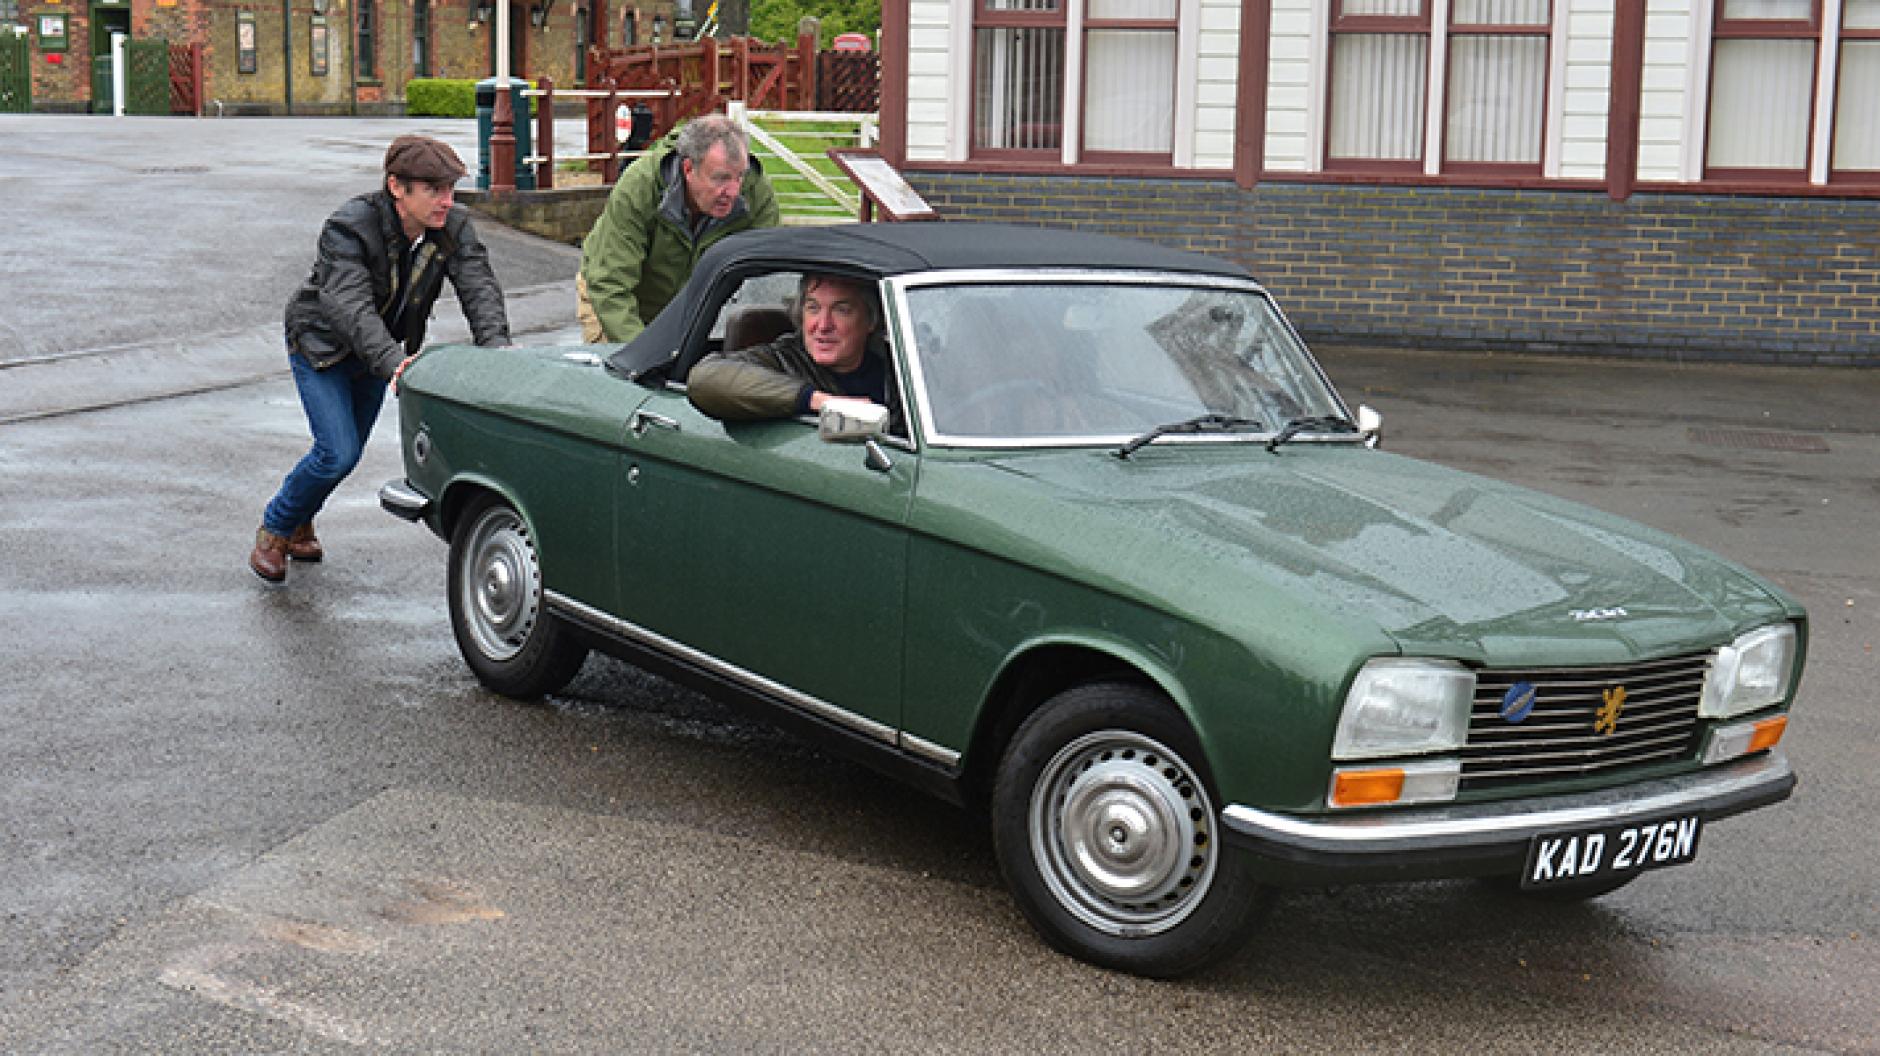 Jeremy and Richard pushing James in his 1970 Peugeot 304 in the Series 22 finale.